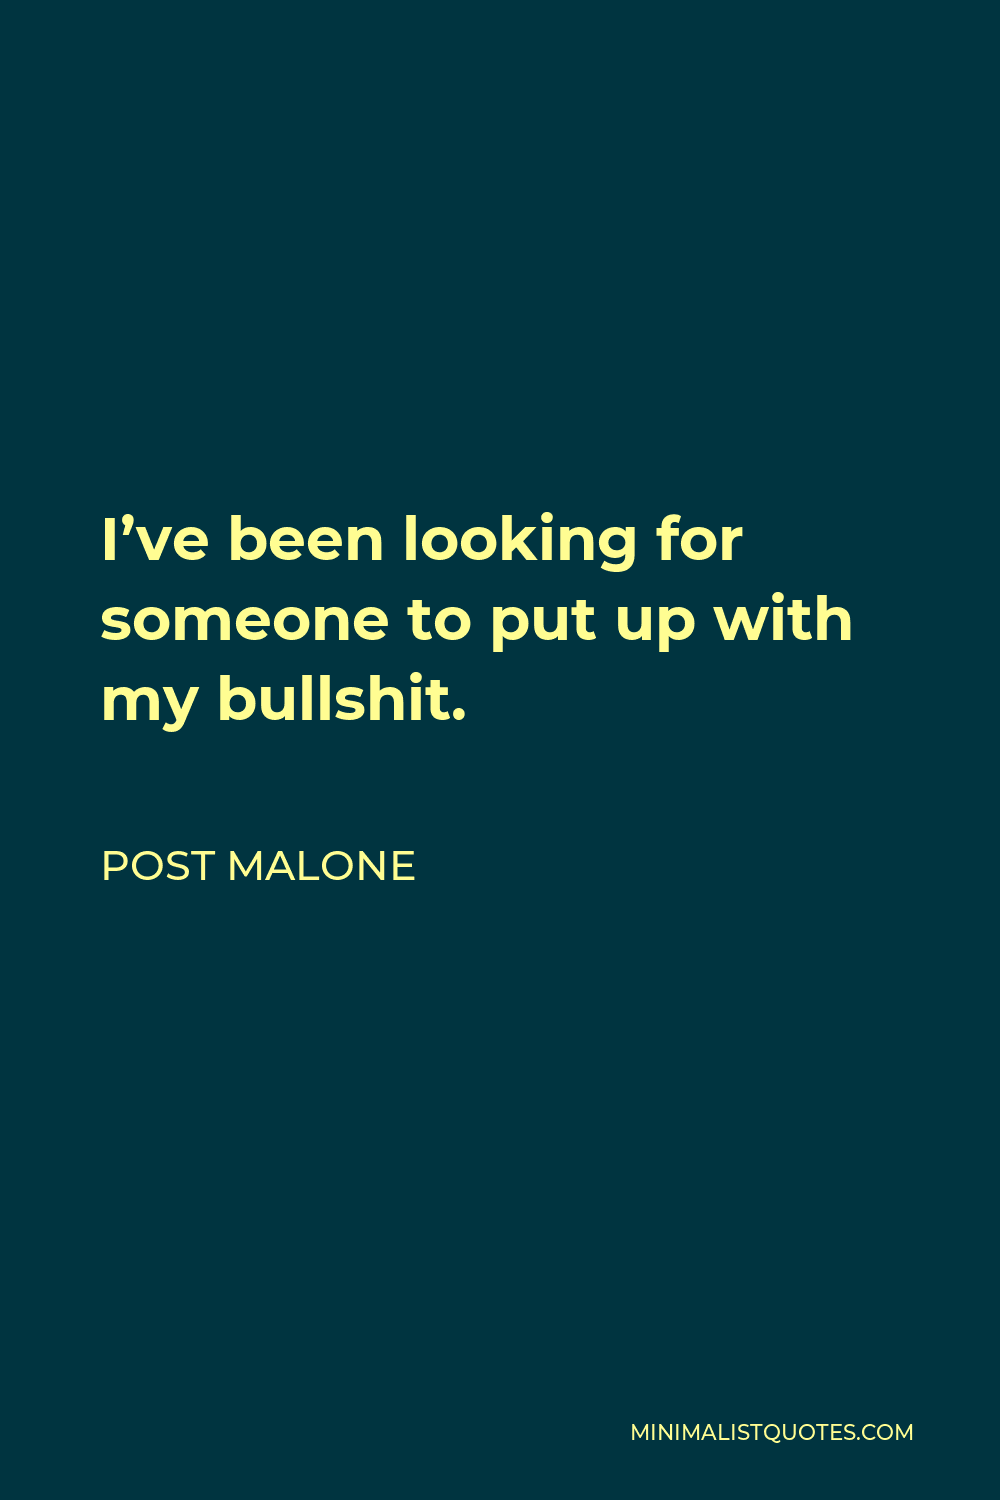 Post Malone Quote - I’ve been looking for someone to put up with my bullshit.